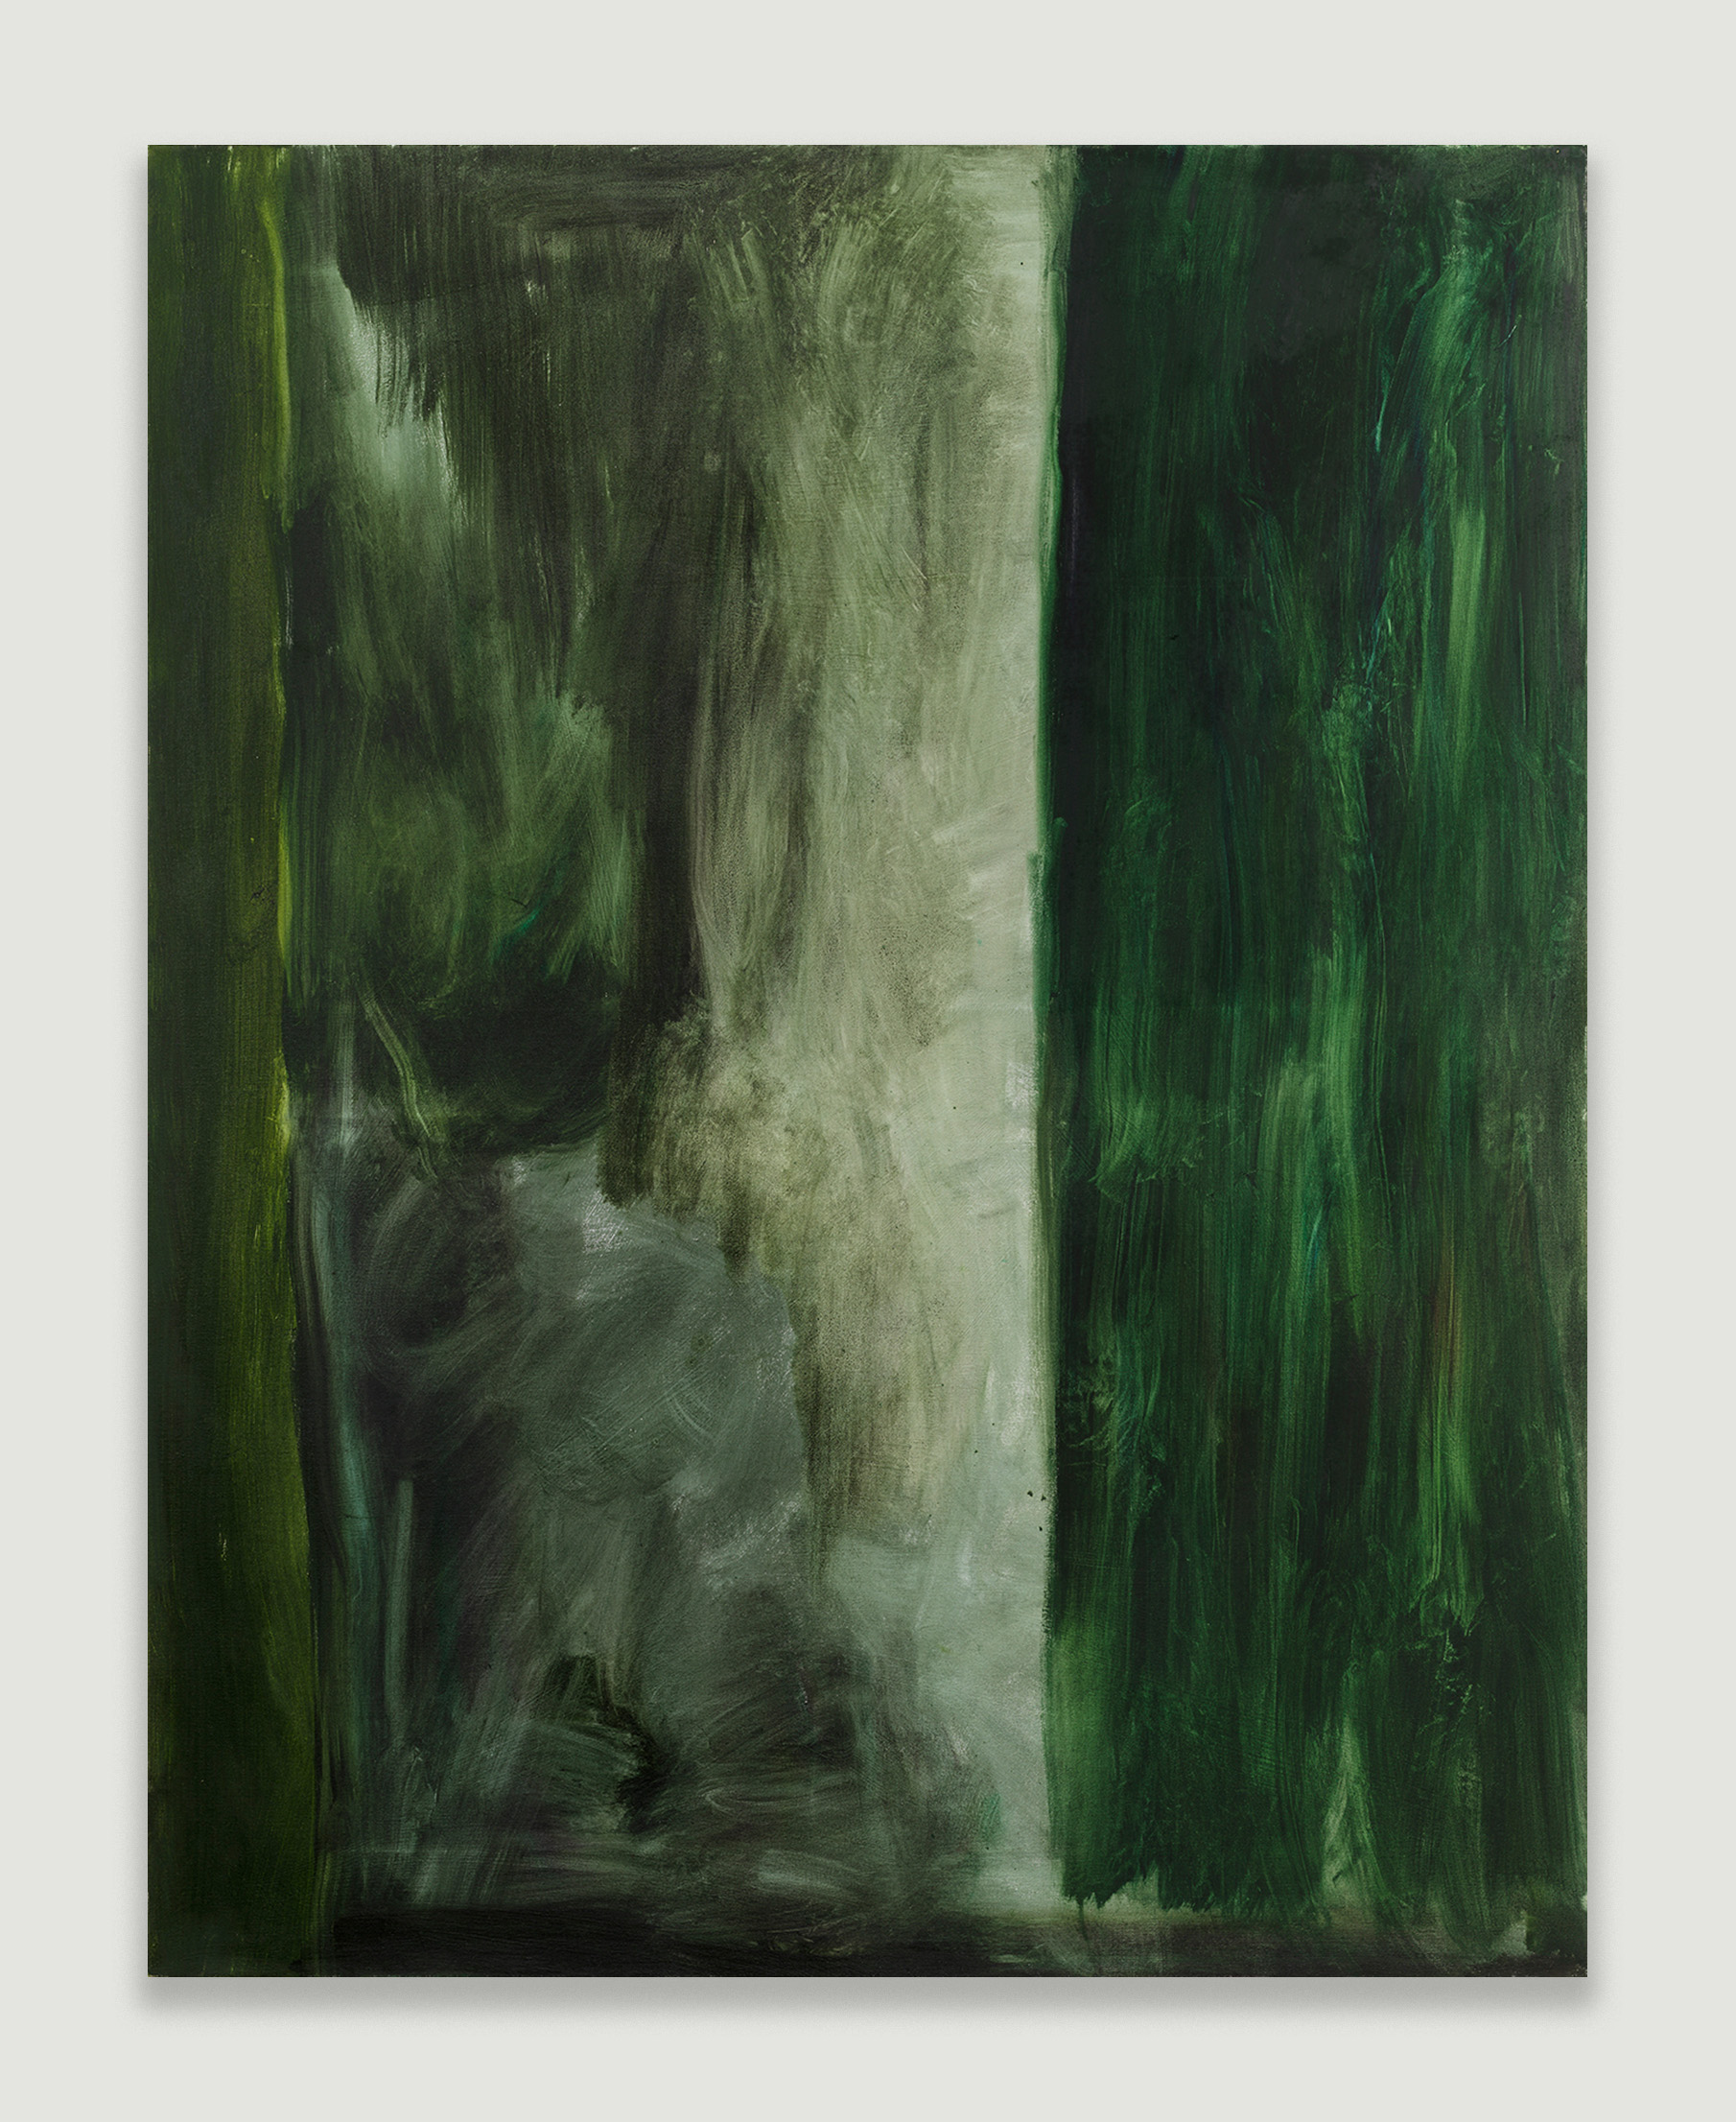 Jane Swavely, OID #3 Green, 2021, Oil on canvas, 56 x 44 in.